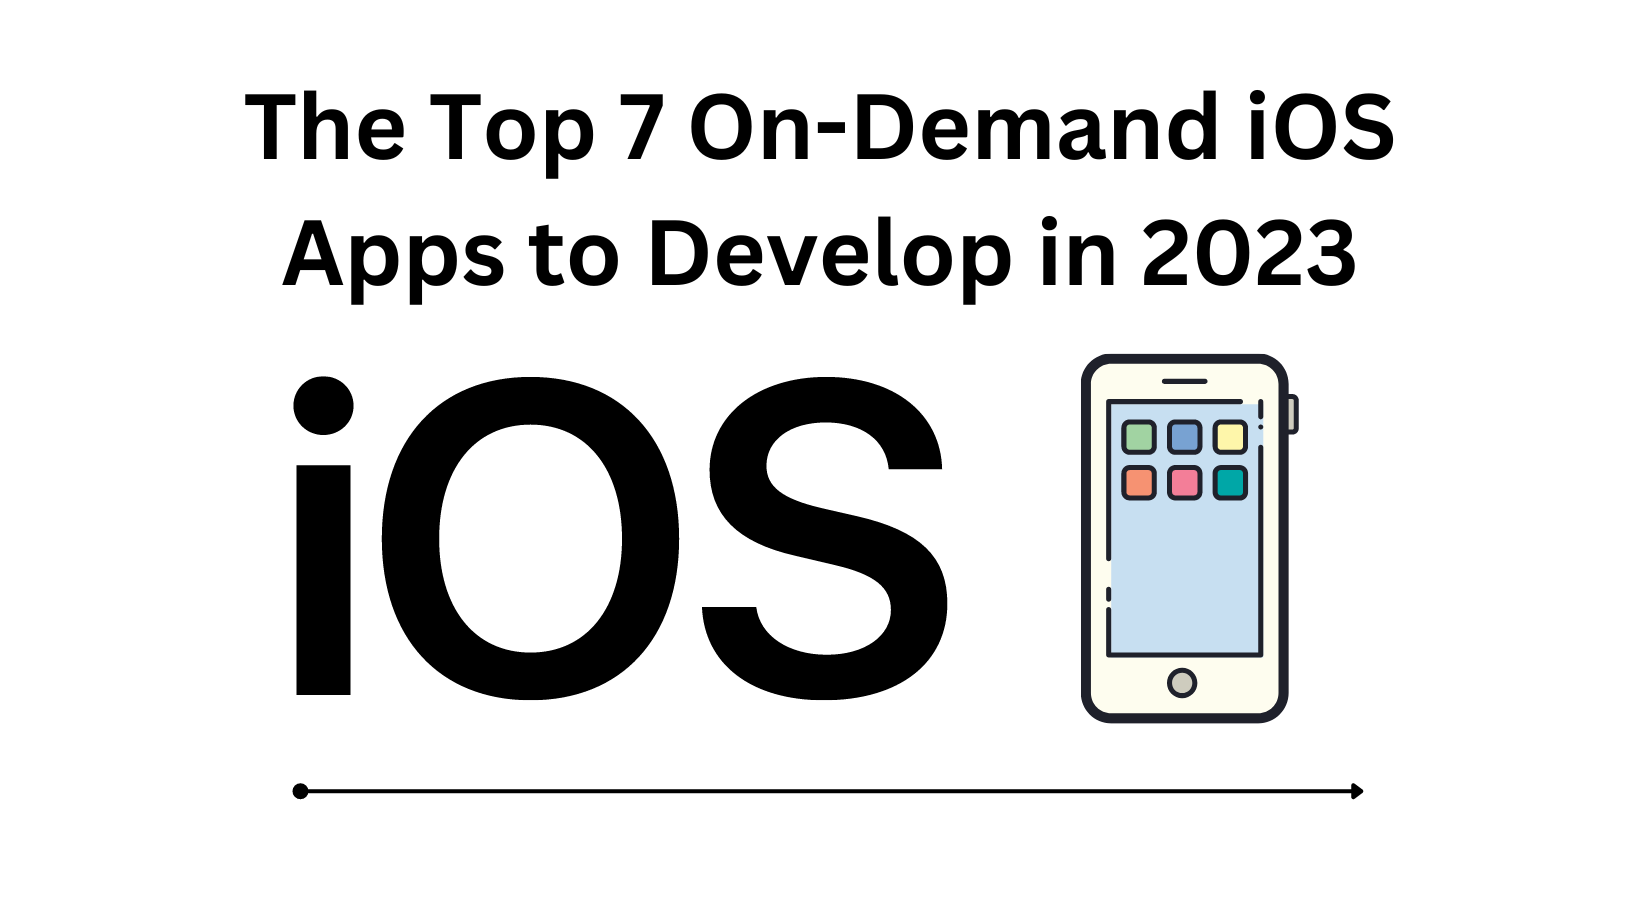 iOS Apps to Develop